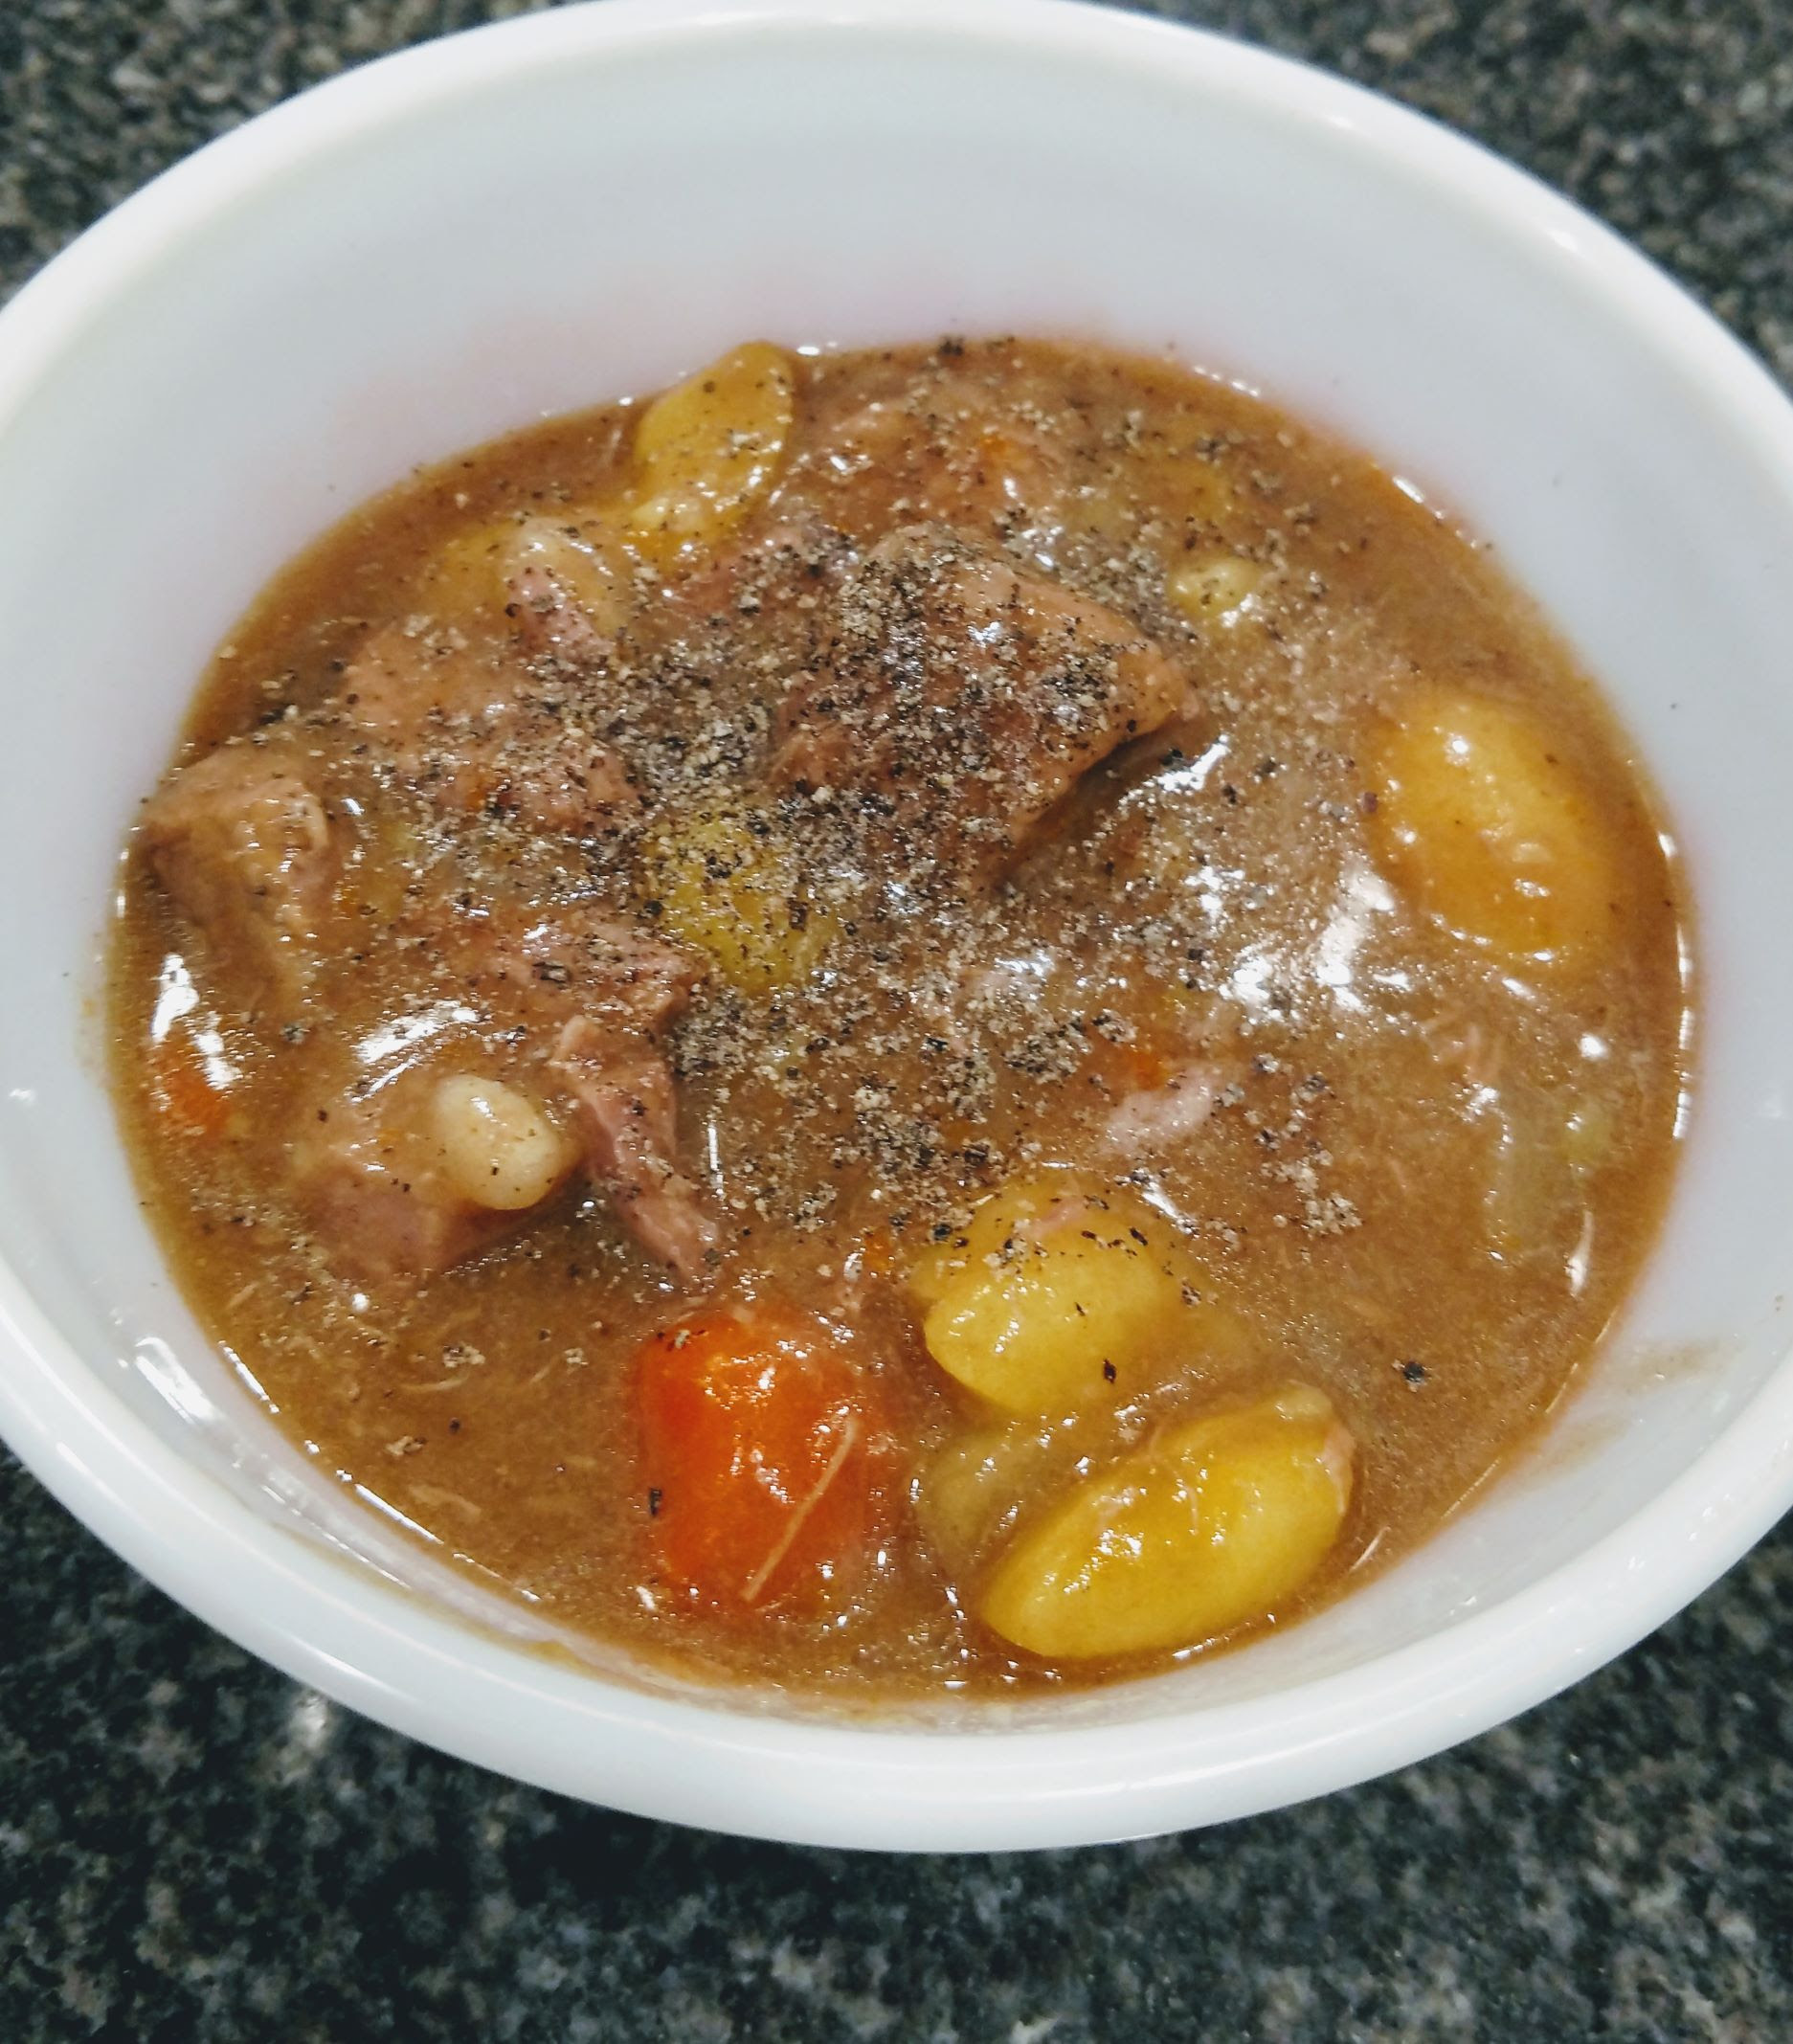 Dinty Moore Beef Stew Recipes / Copycat Dinty Moore Beef Stew Recipe